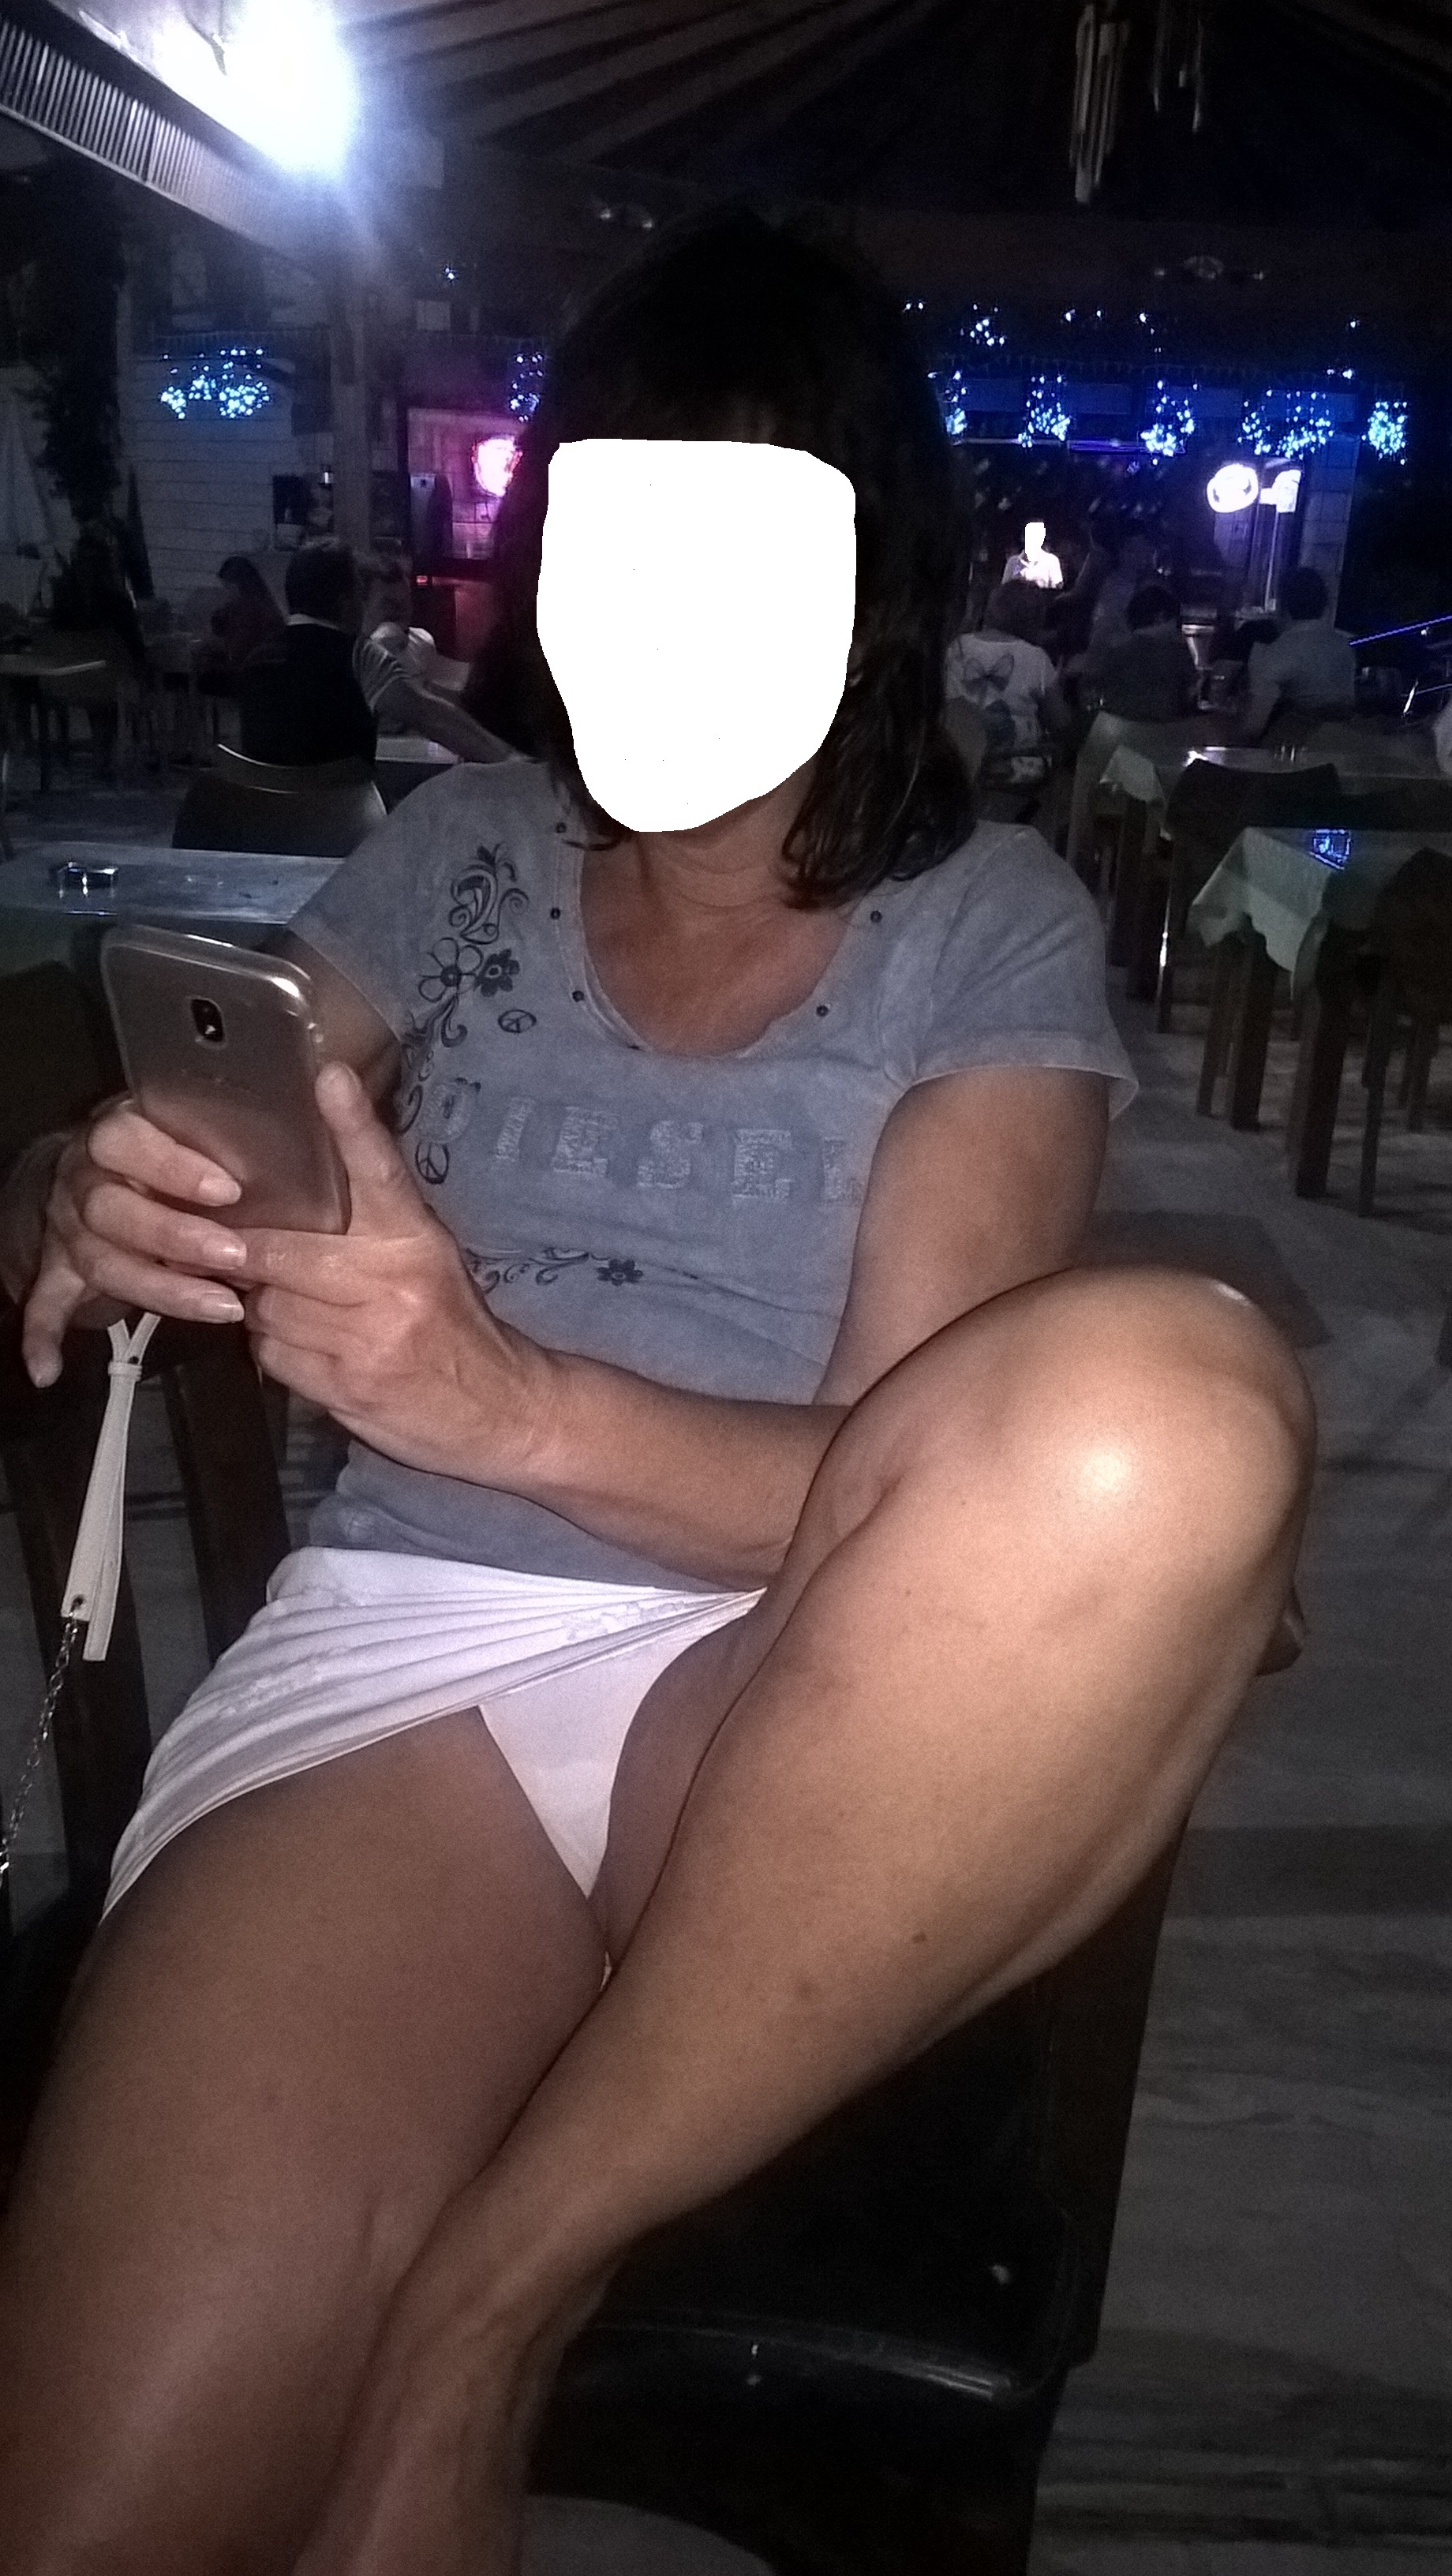 Bar Sex Amateur - My wife showing a sexy upskirt in the bar - Cowgirl/She on ...